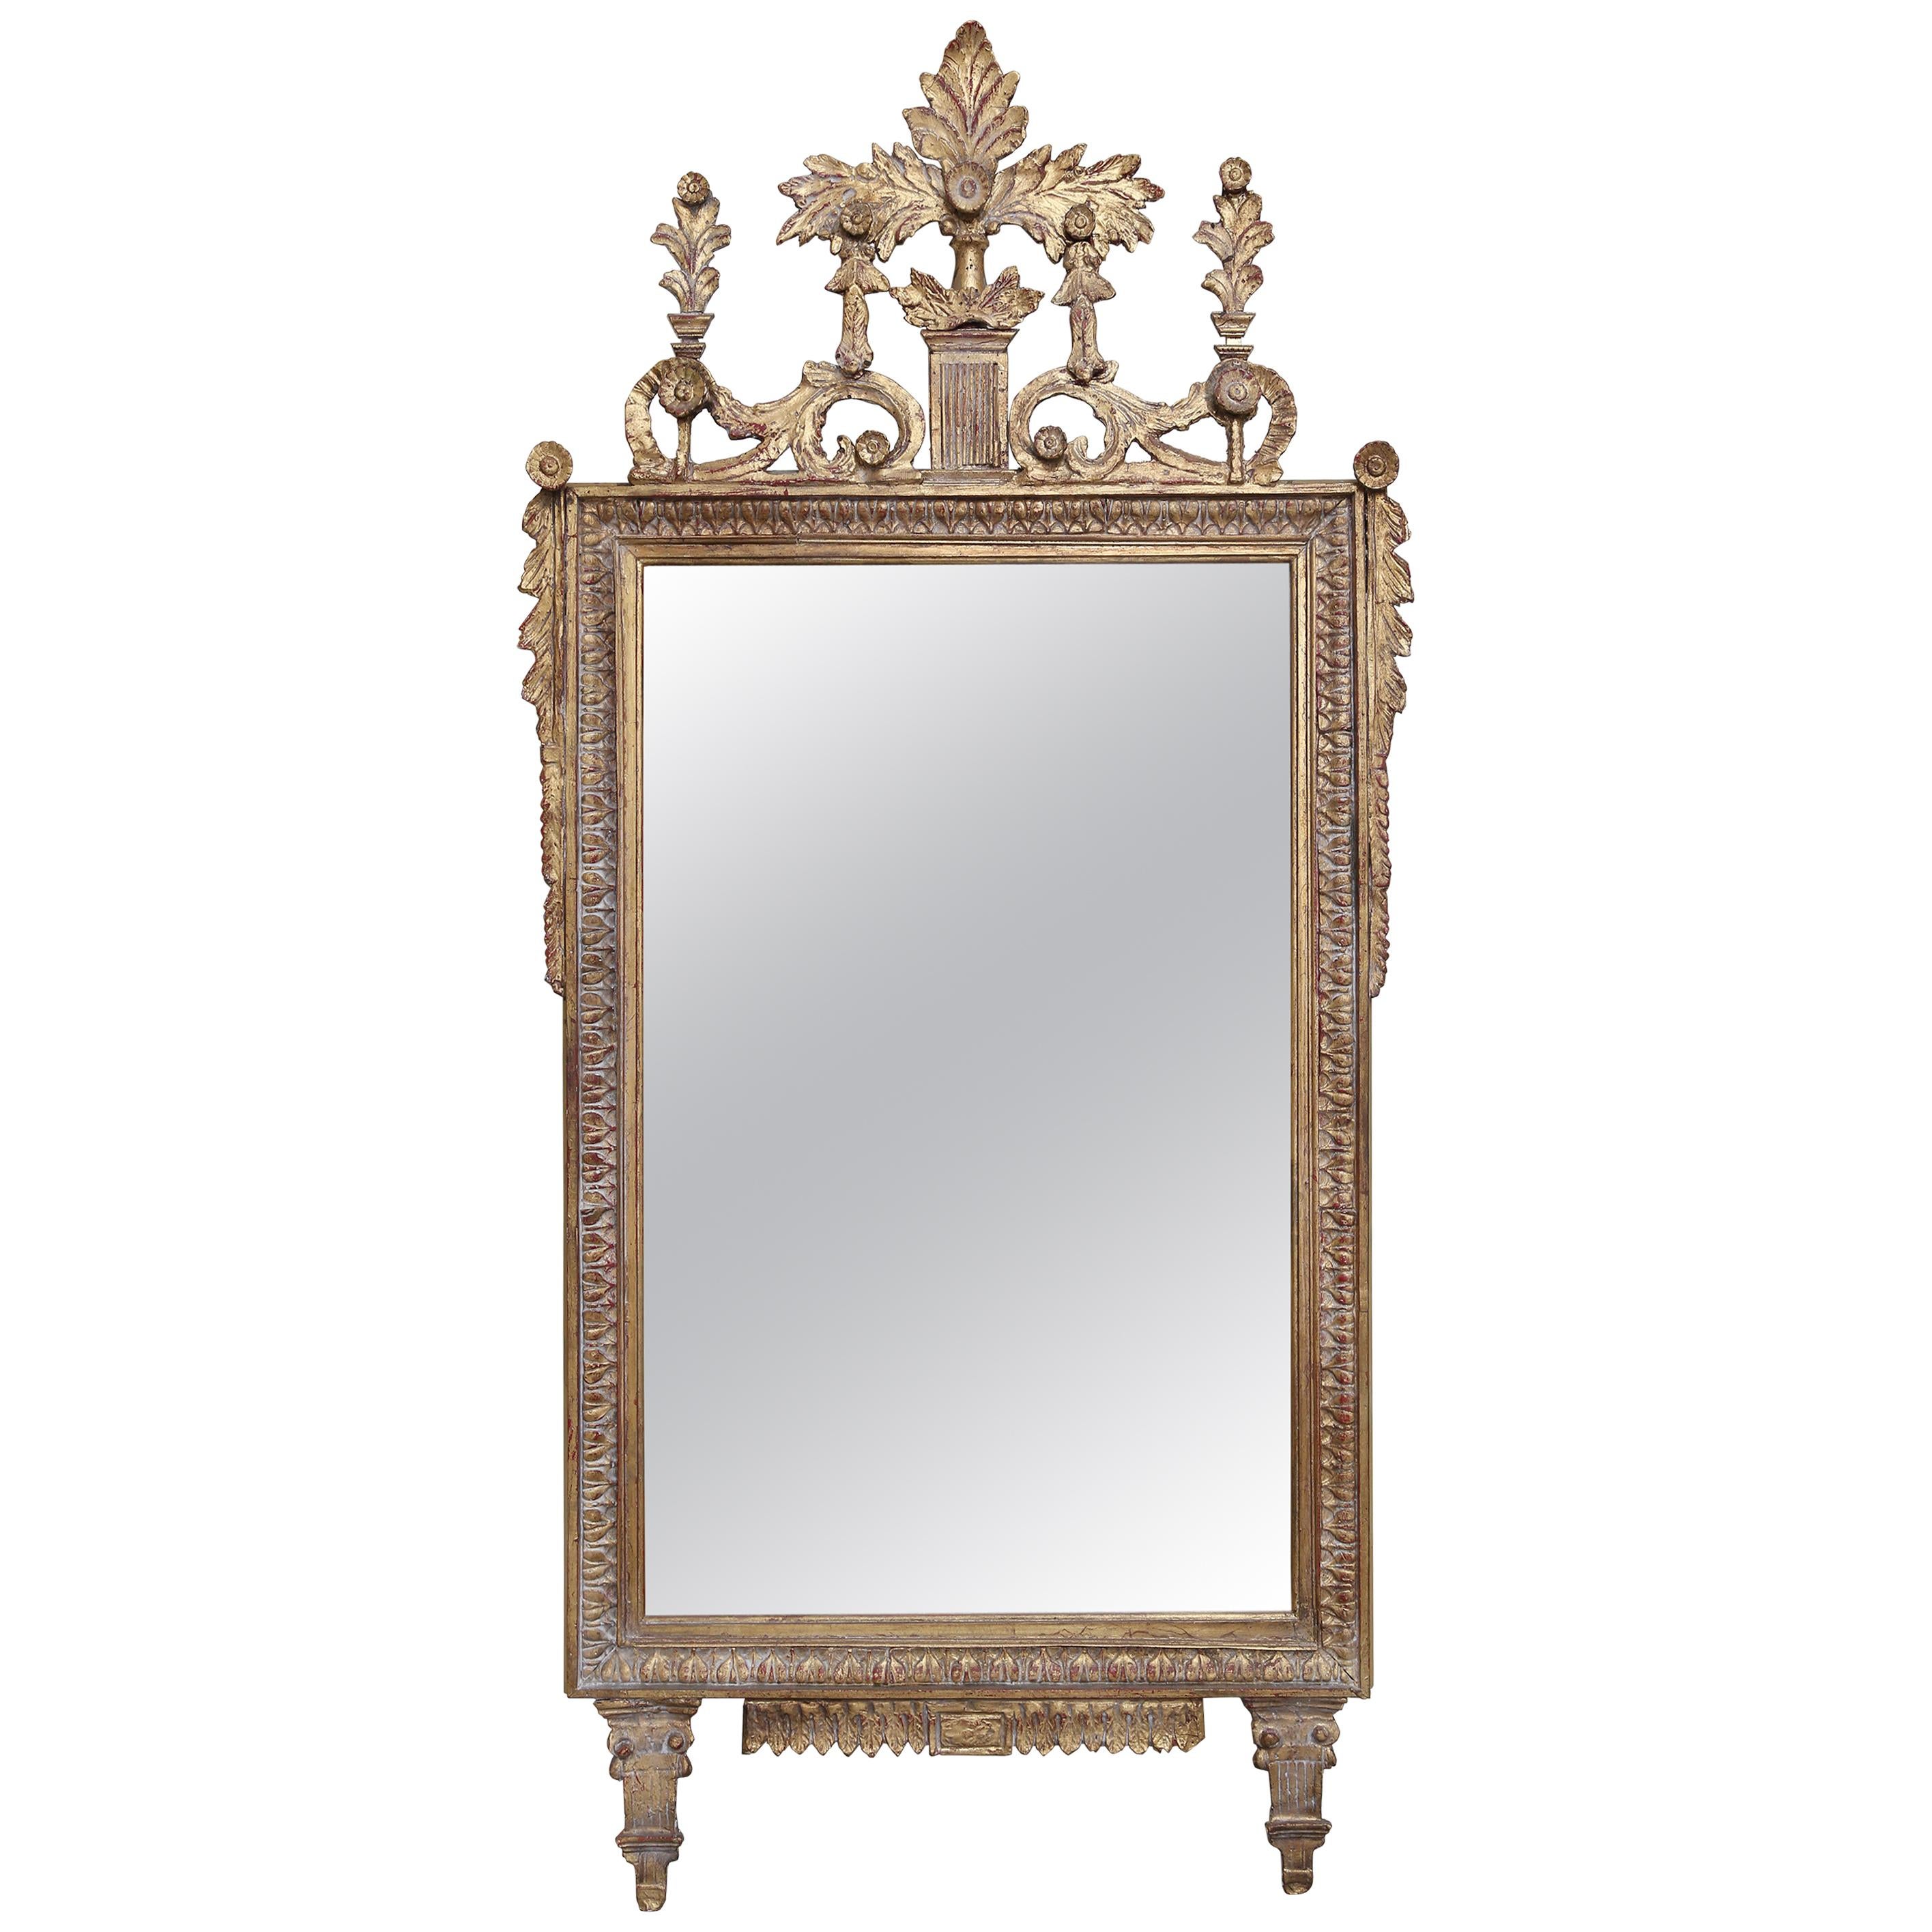 Italianate Giltwood Mirror Hand Carved in the Neo-Classical Fashion